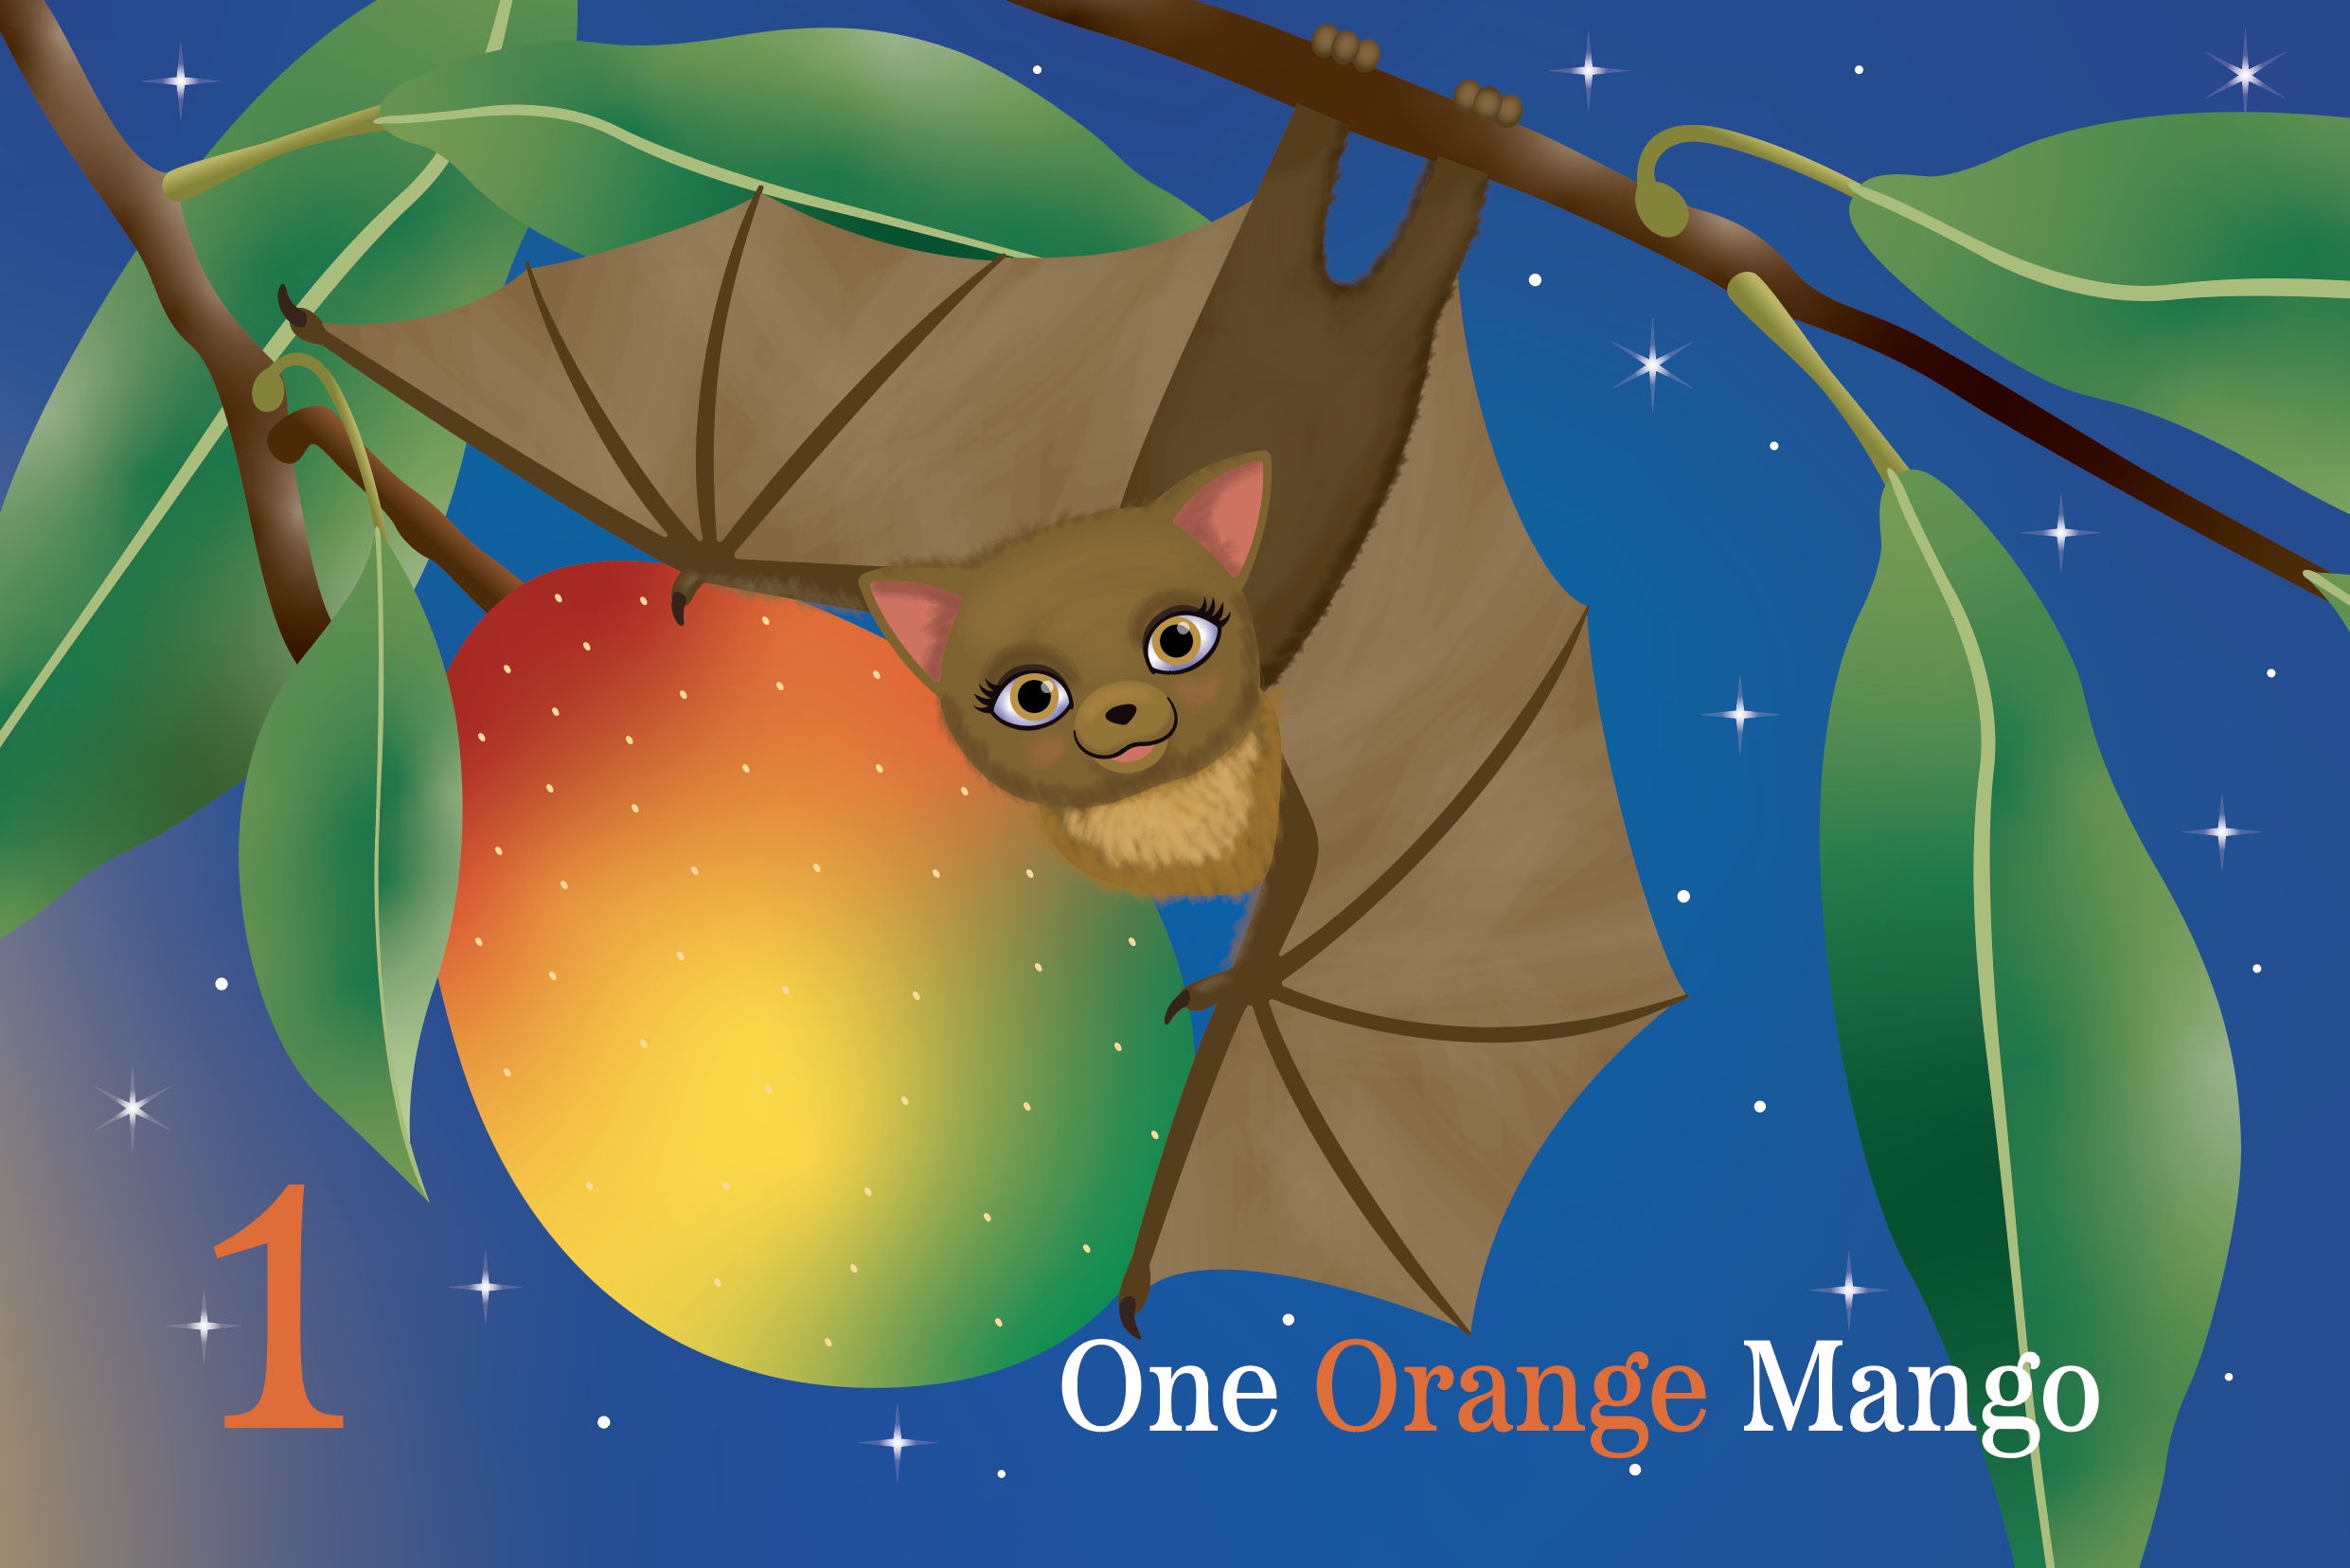 slide 2  Bonita the Fruit Bat, by Bonnie Lady Lee. [Excerpt] I''m Bonita the Fruit Bat. Let's count from one to ten together.